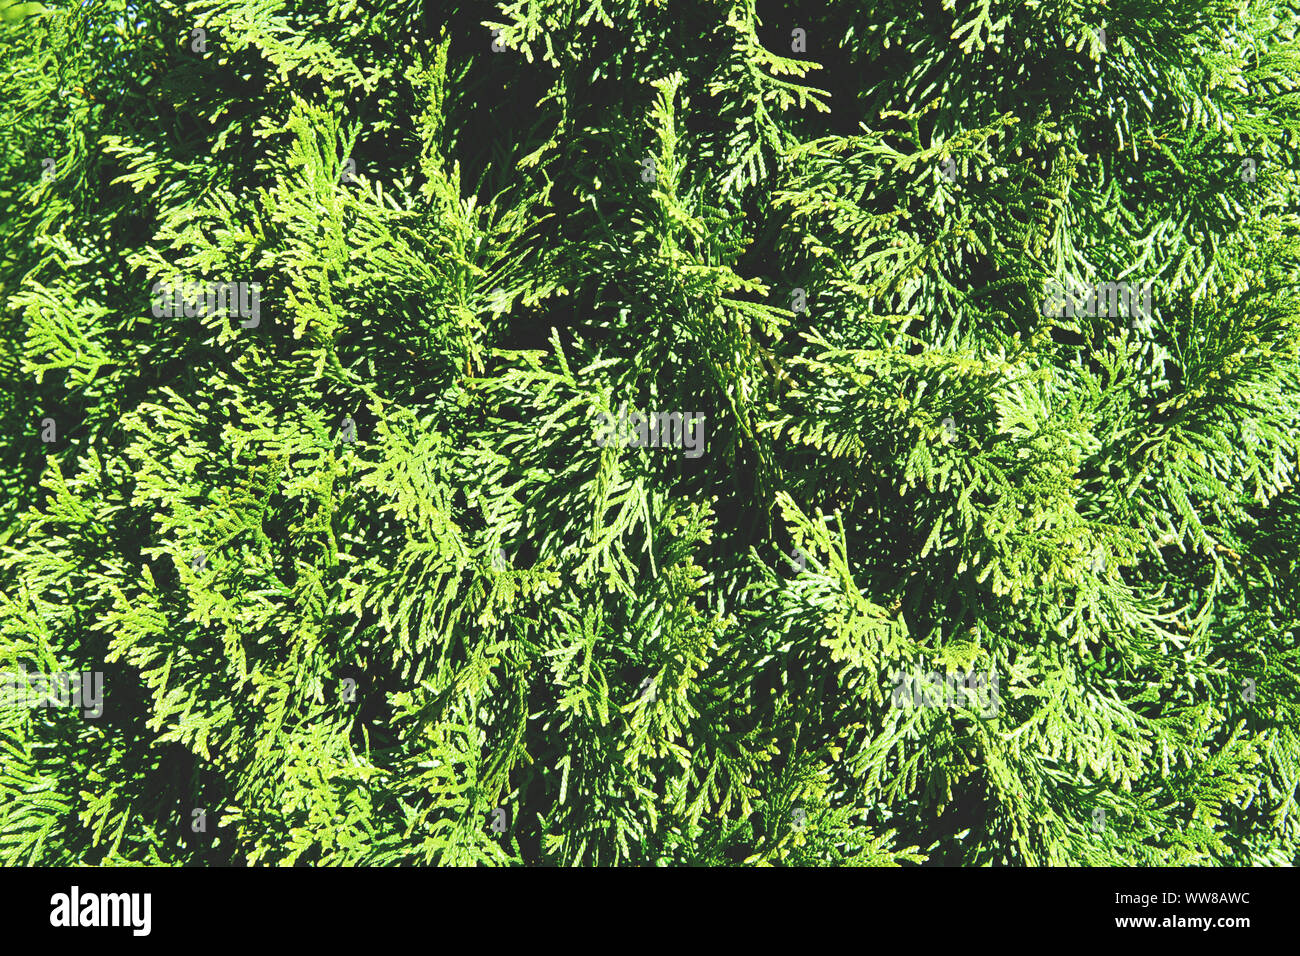 Green natural background. Hedge of thuja trees, close up. Stock Photo